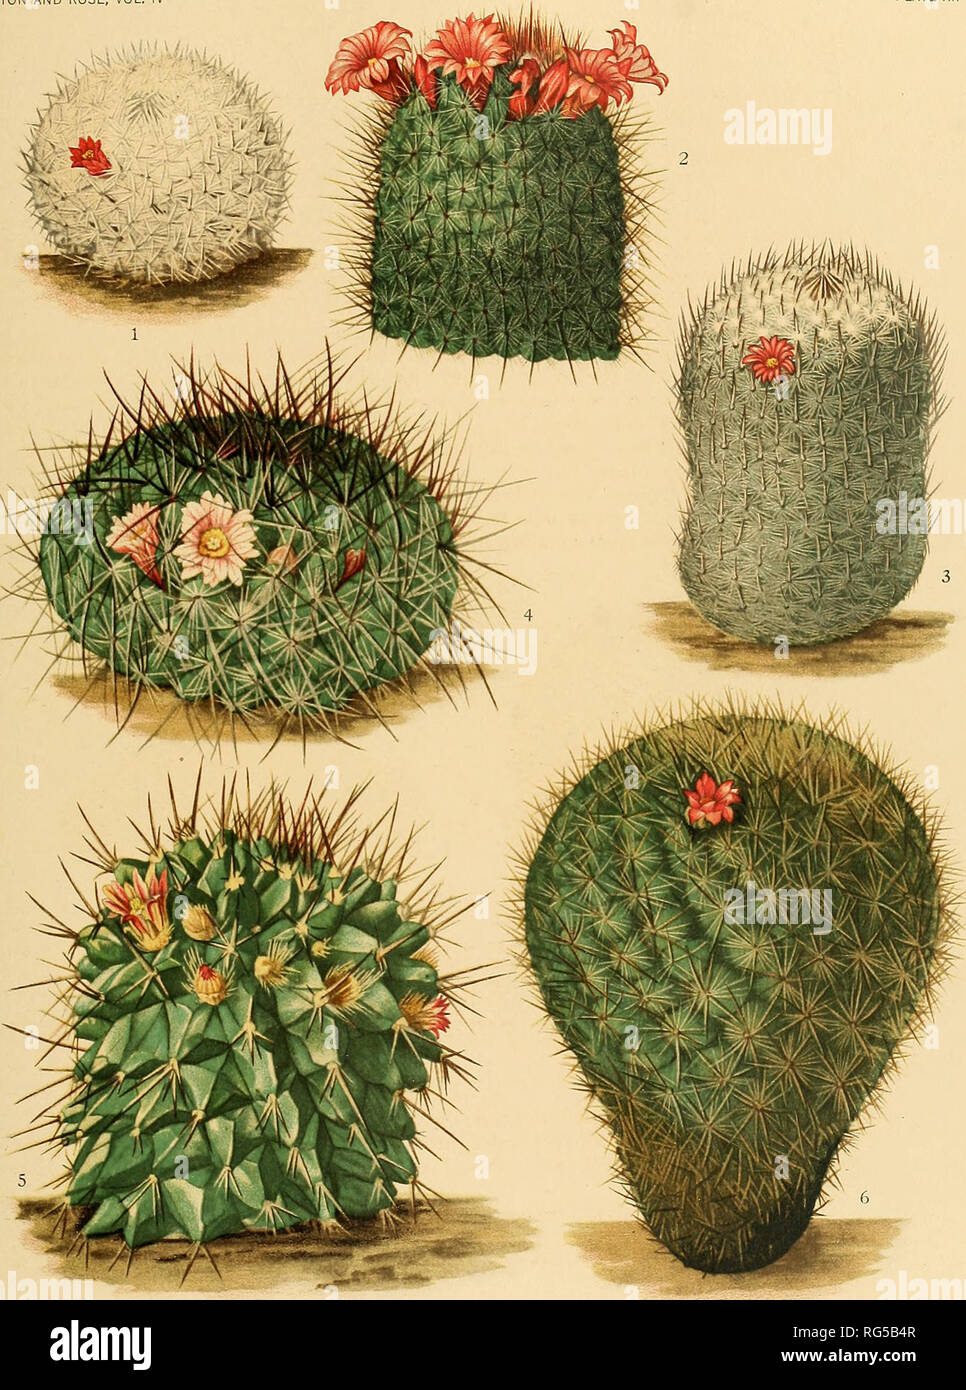 . The Cactaceae : descriptions and illustrations of plants of the cactus family. . ^3r??^^^^v^&quot;—' ' M. E, Eaton del. jnooisc. a*m 1. Flowering plant of Neomammilla7-ia pseudoperbella. 4. Flowering plant oi Neomanimillaria amoena. 2. Top of flowering plant of yVfwwrtwwzz7/arzaj-/'Z7Z(7«m»za. 5. '^oyi&amp;rroT(,^^QiKeomammillaria polyedra. 3. Flowering plant of Neomammillaria dealbata. 6. 'BXo^^x'm'gT^sl'i.^Xoi Neomammillaria celsiana.. Please note that these images are extracted from scanned page images that may have been digitally enhanced for readability - coloration and appearance Stock Photo